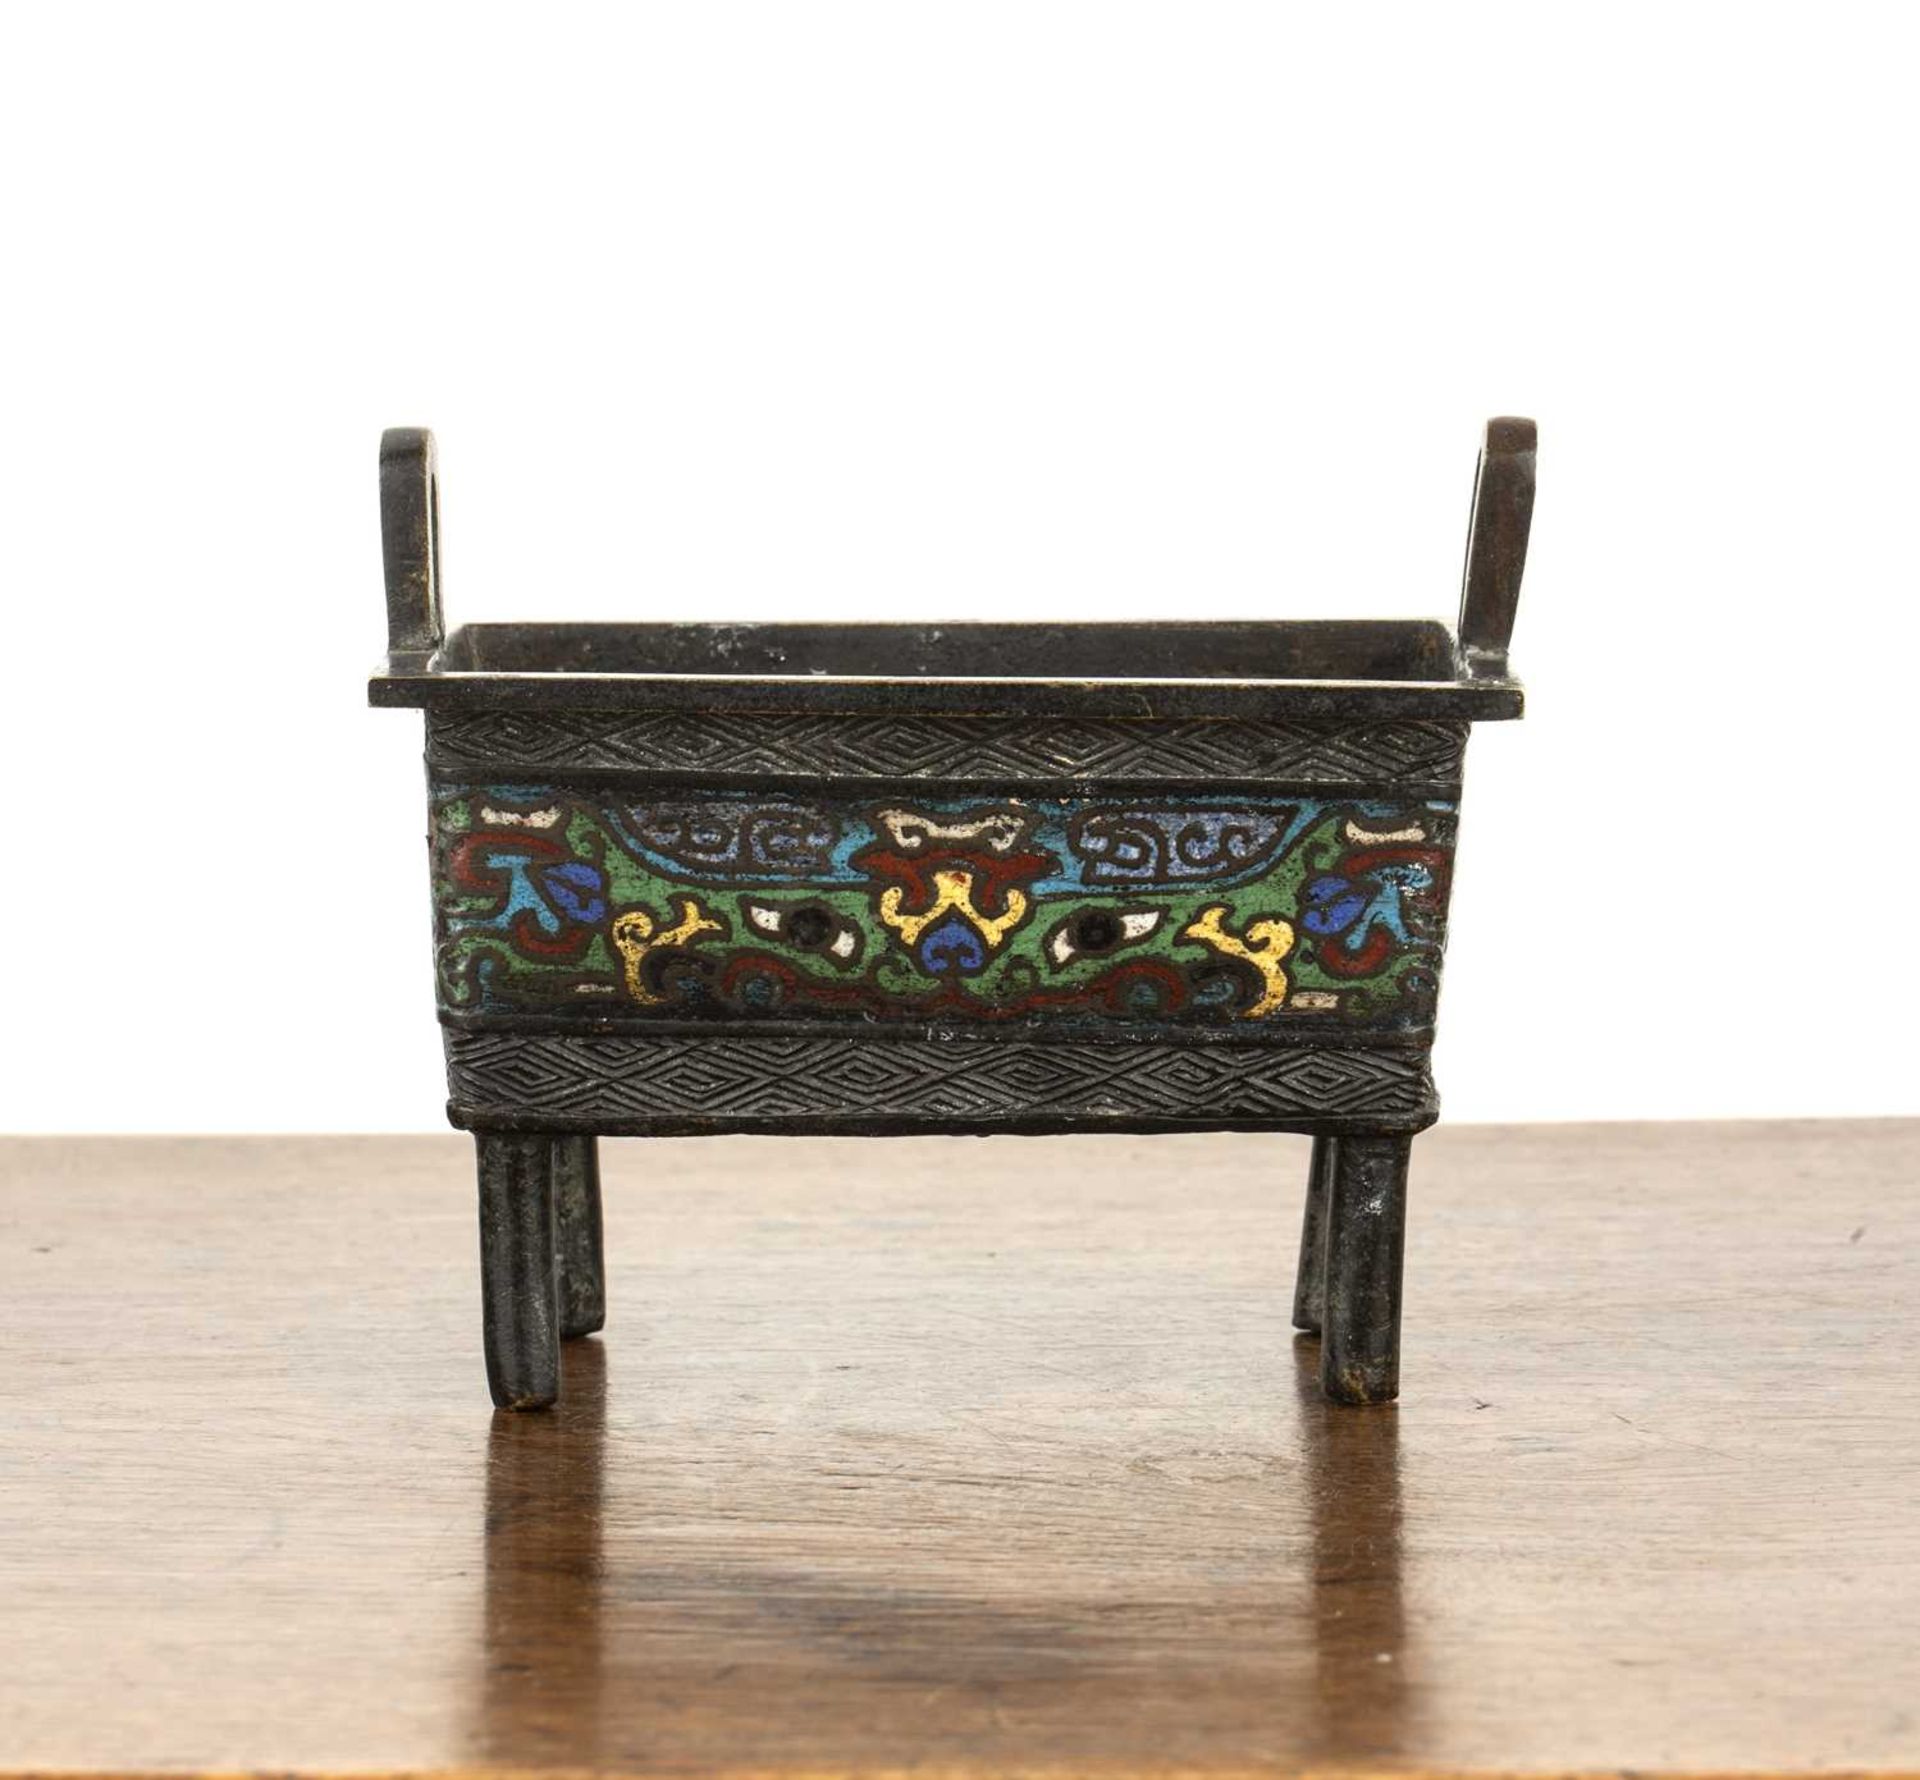 Small bronze censer Chinese of rectangular form with cloisonne panels, 13cm x 8.6cm x 11cm - Image 2 of 6